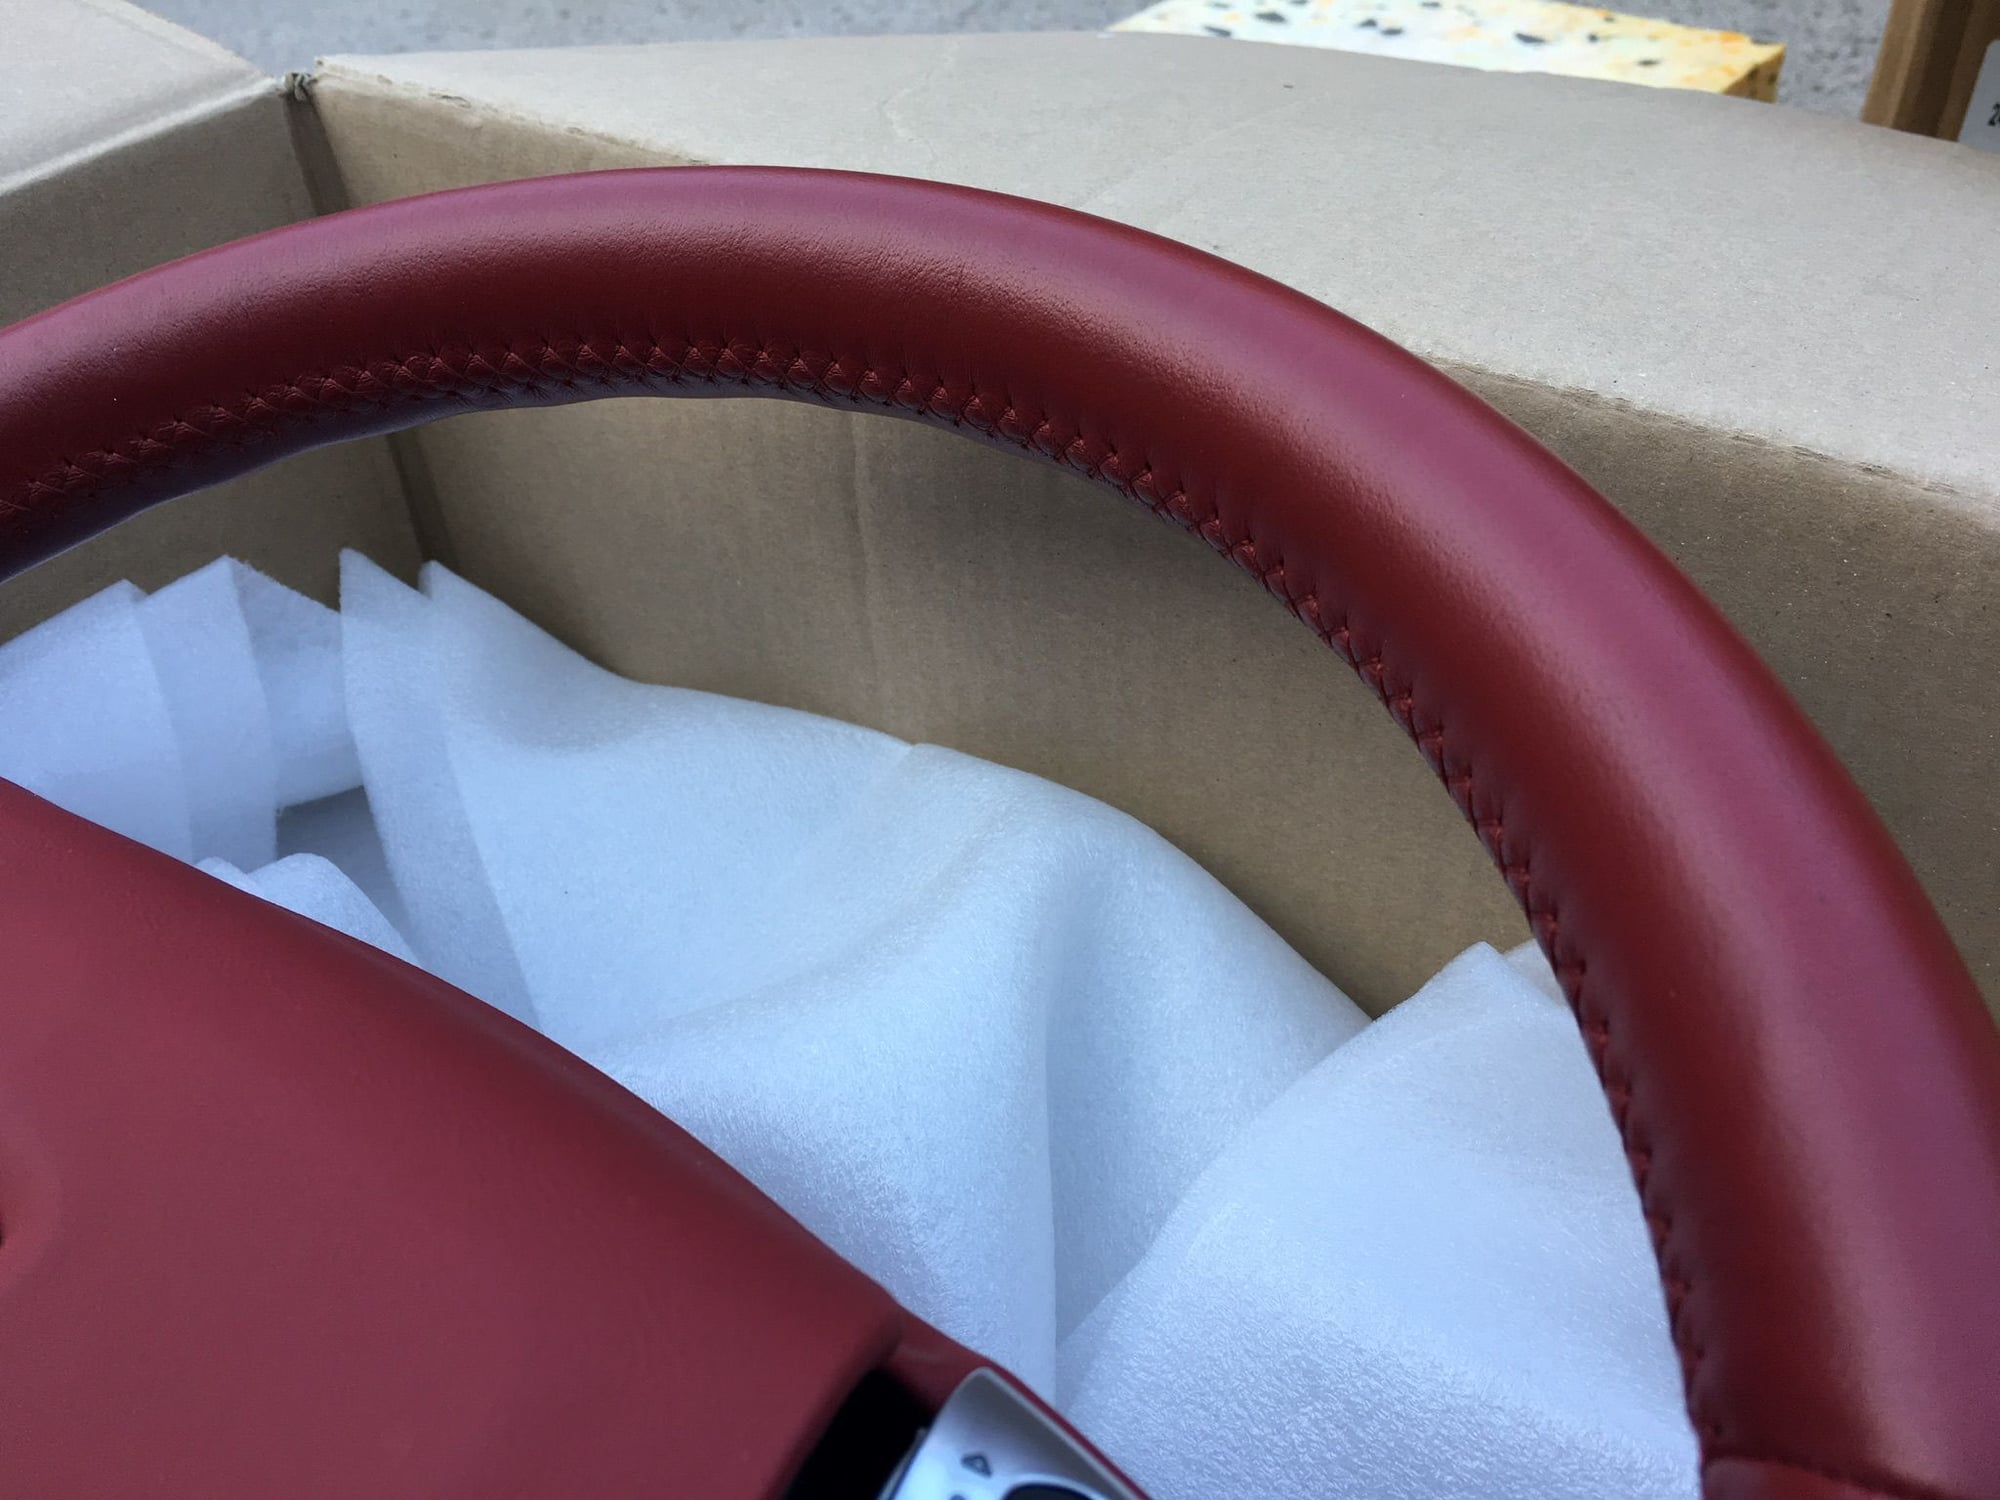 Interior/Upholstery - Porsche 911 997 Carrera Red Leather Multifunction Steering Wheel Excellent Conidtion - Used - 2005 to 2011 Porsche 911 - Palos Verdes Estates, CA 90274, United States